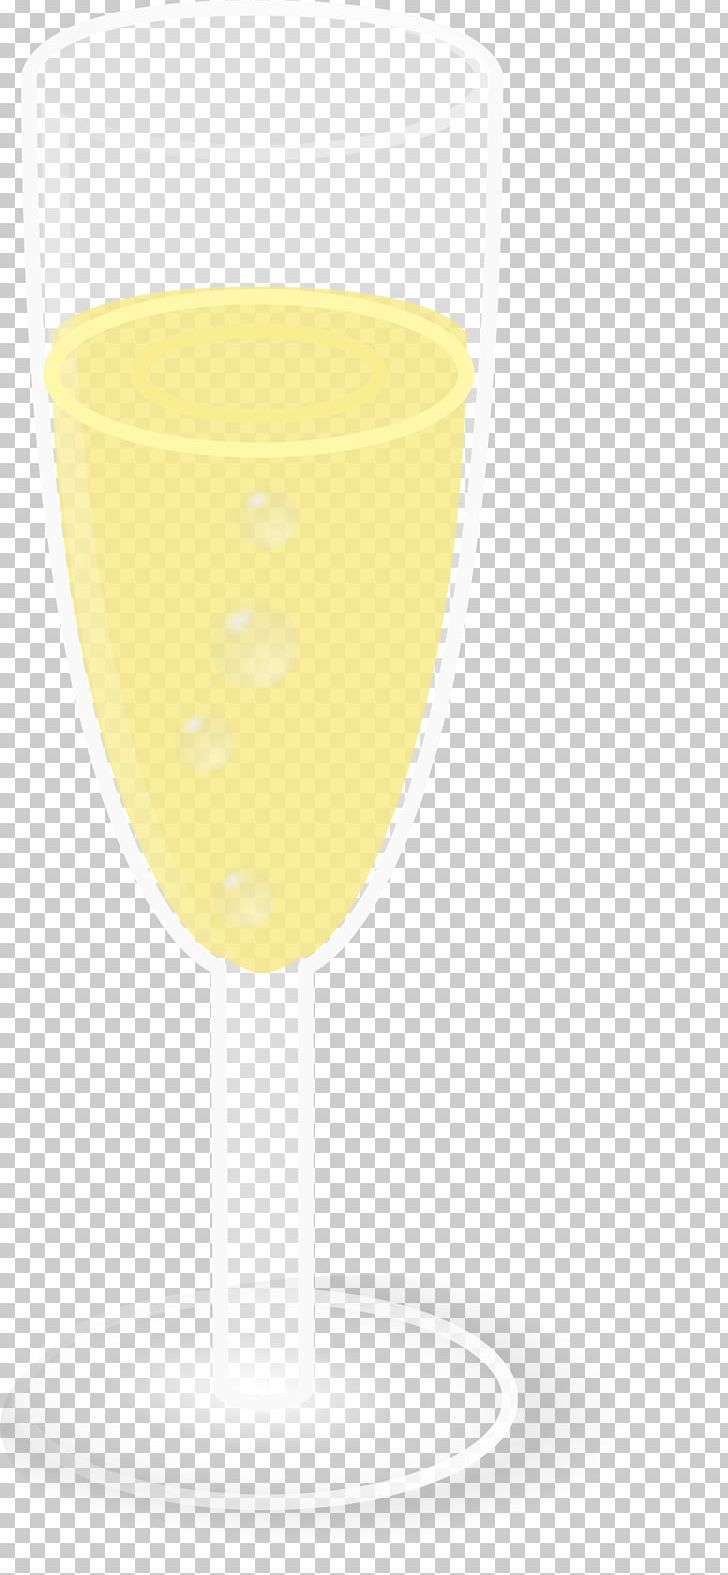 Champagne Glass Champagne Glass Wine Glass PNG, Clipart, Champagne, Champagne Glass, Champagne Stemware, Cup, Drawing Free PNG Download